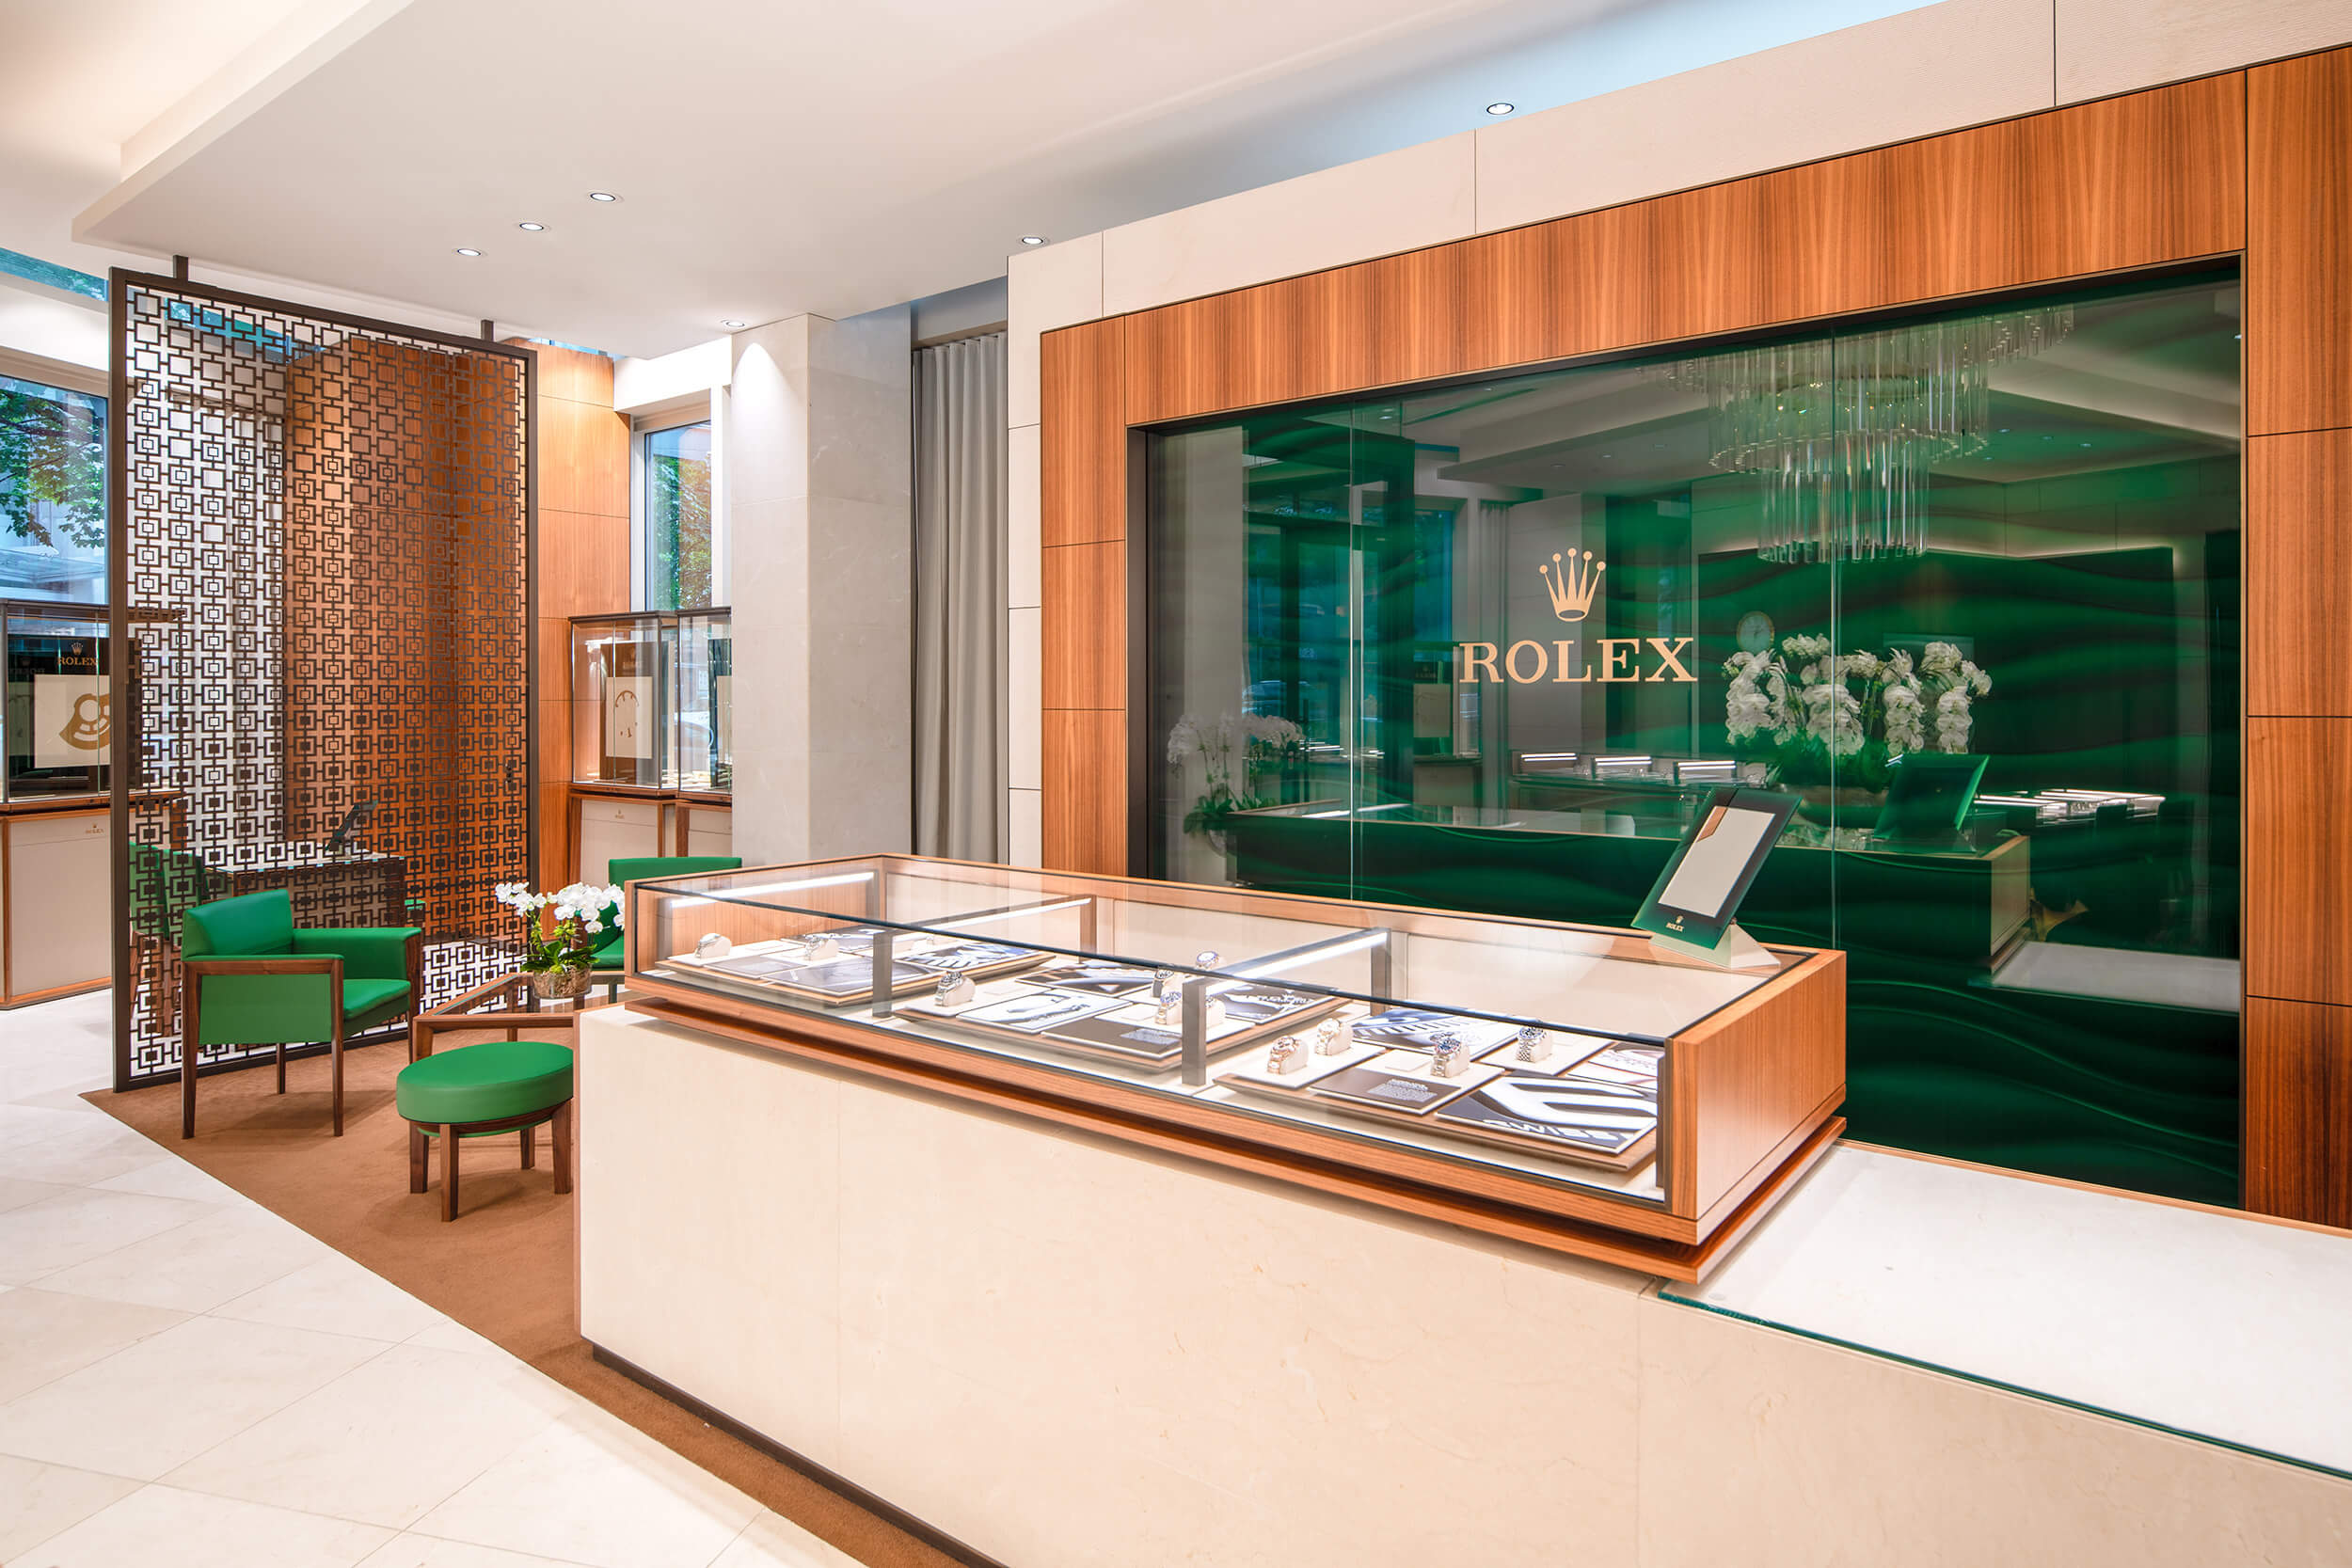 Interior of a Rolex store with elegant display cases, green decor, and a prominent Rolex logo on the back wall.